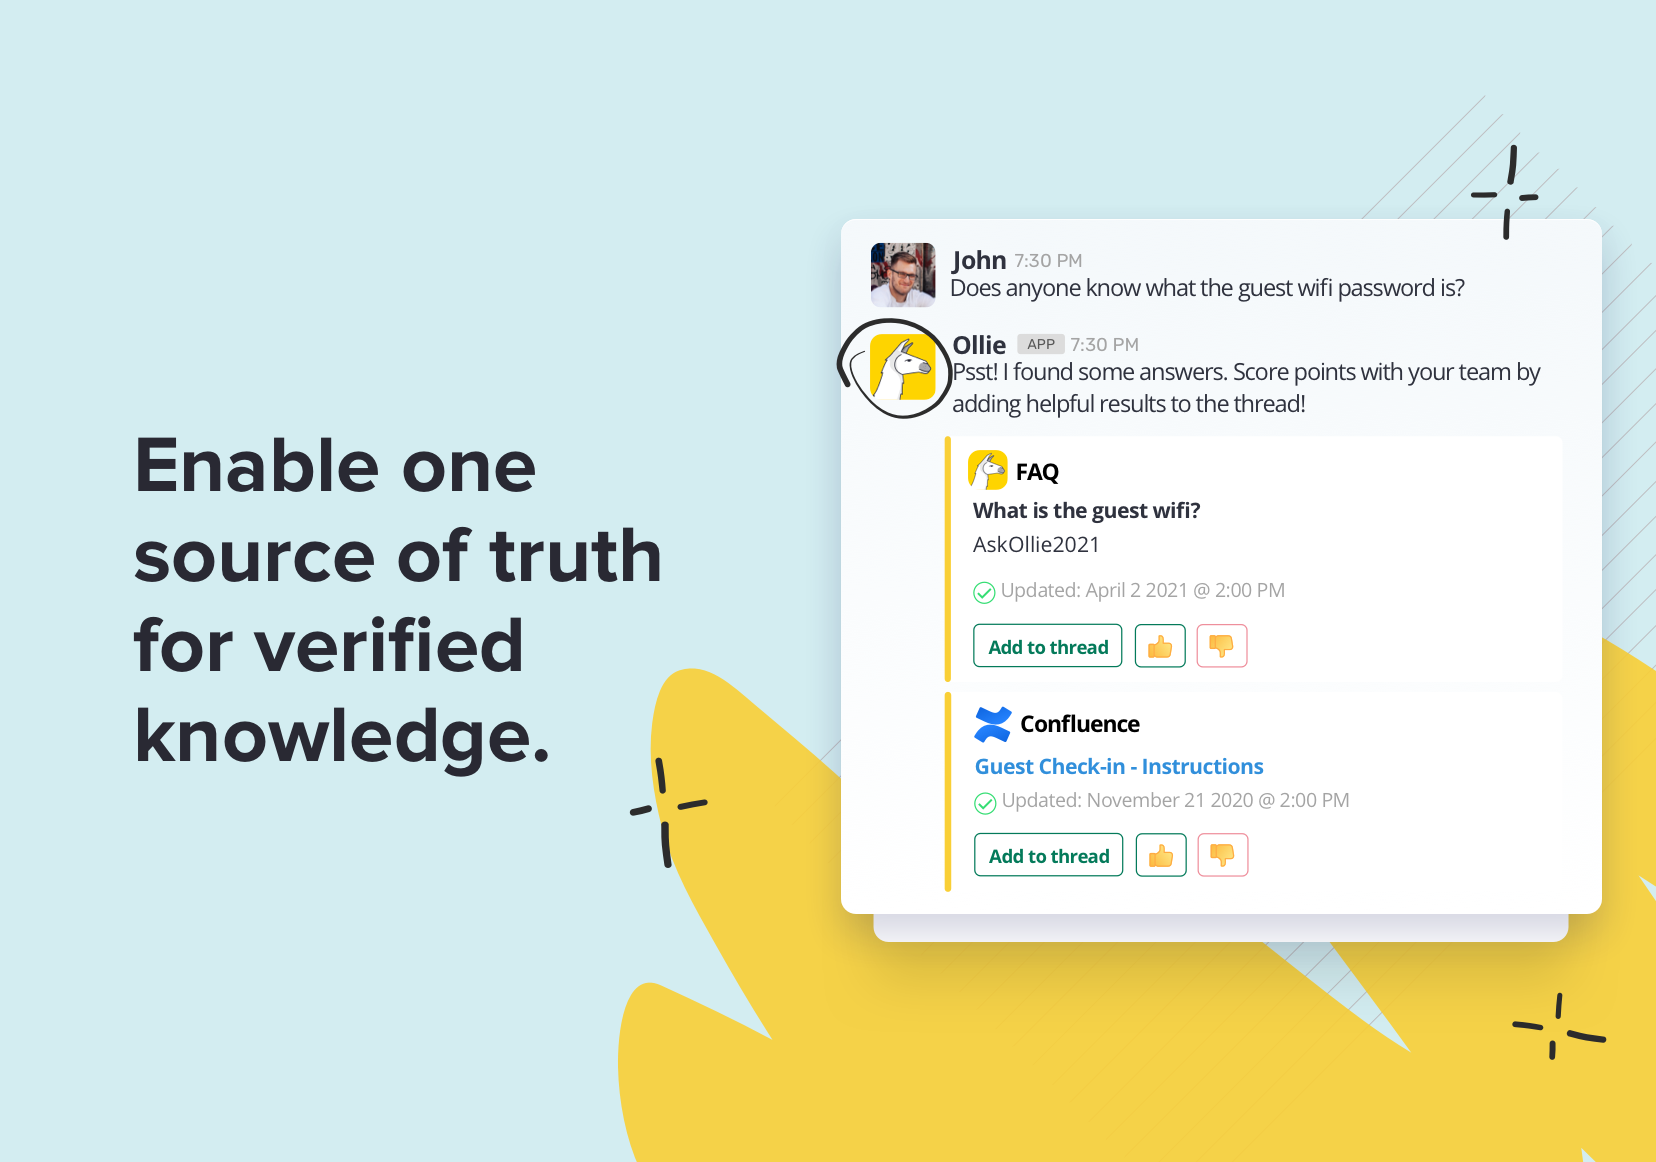 Enable one source of truth for verified knowledge.